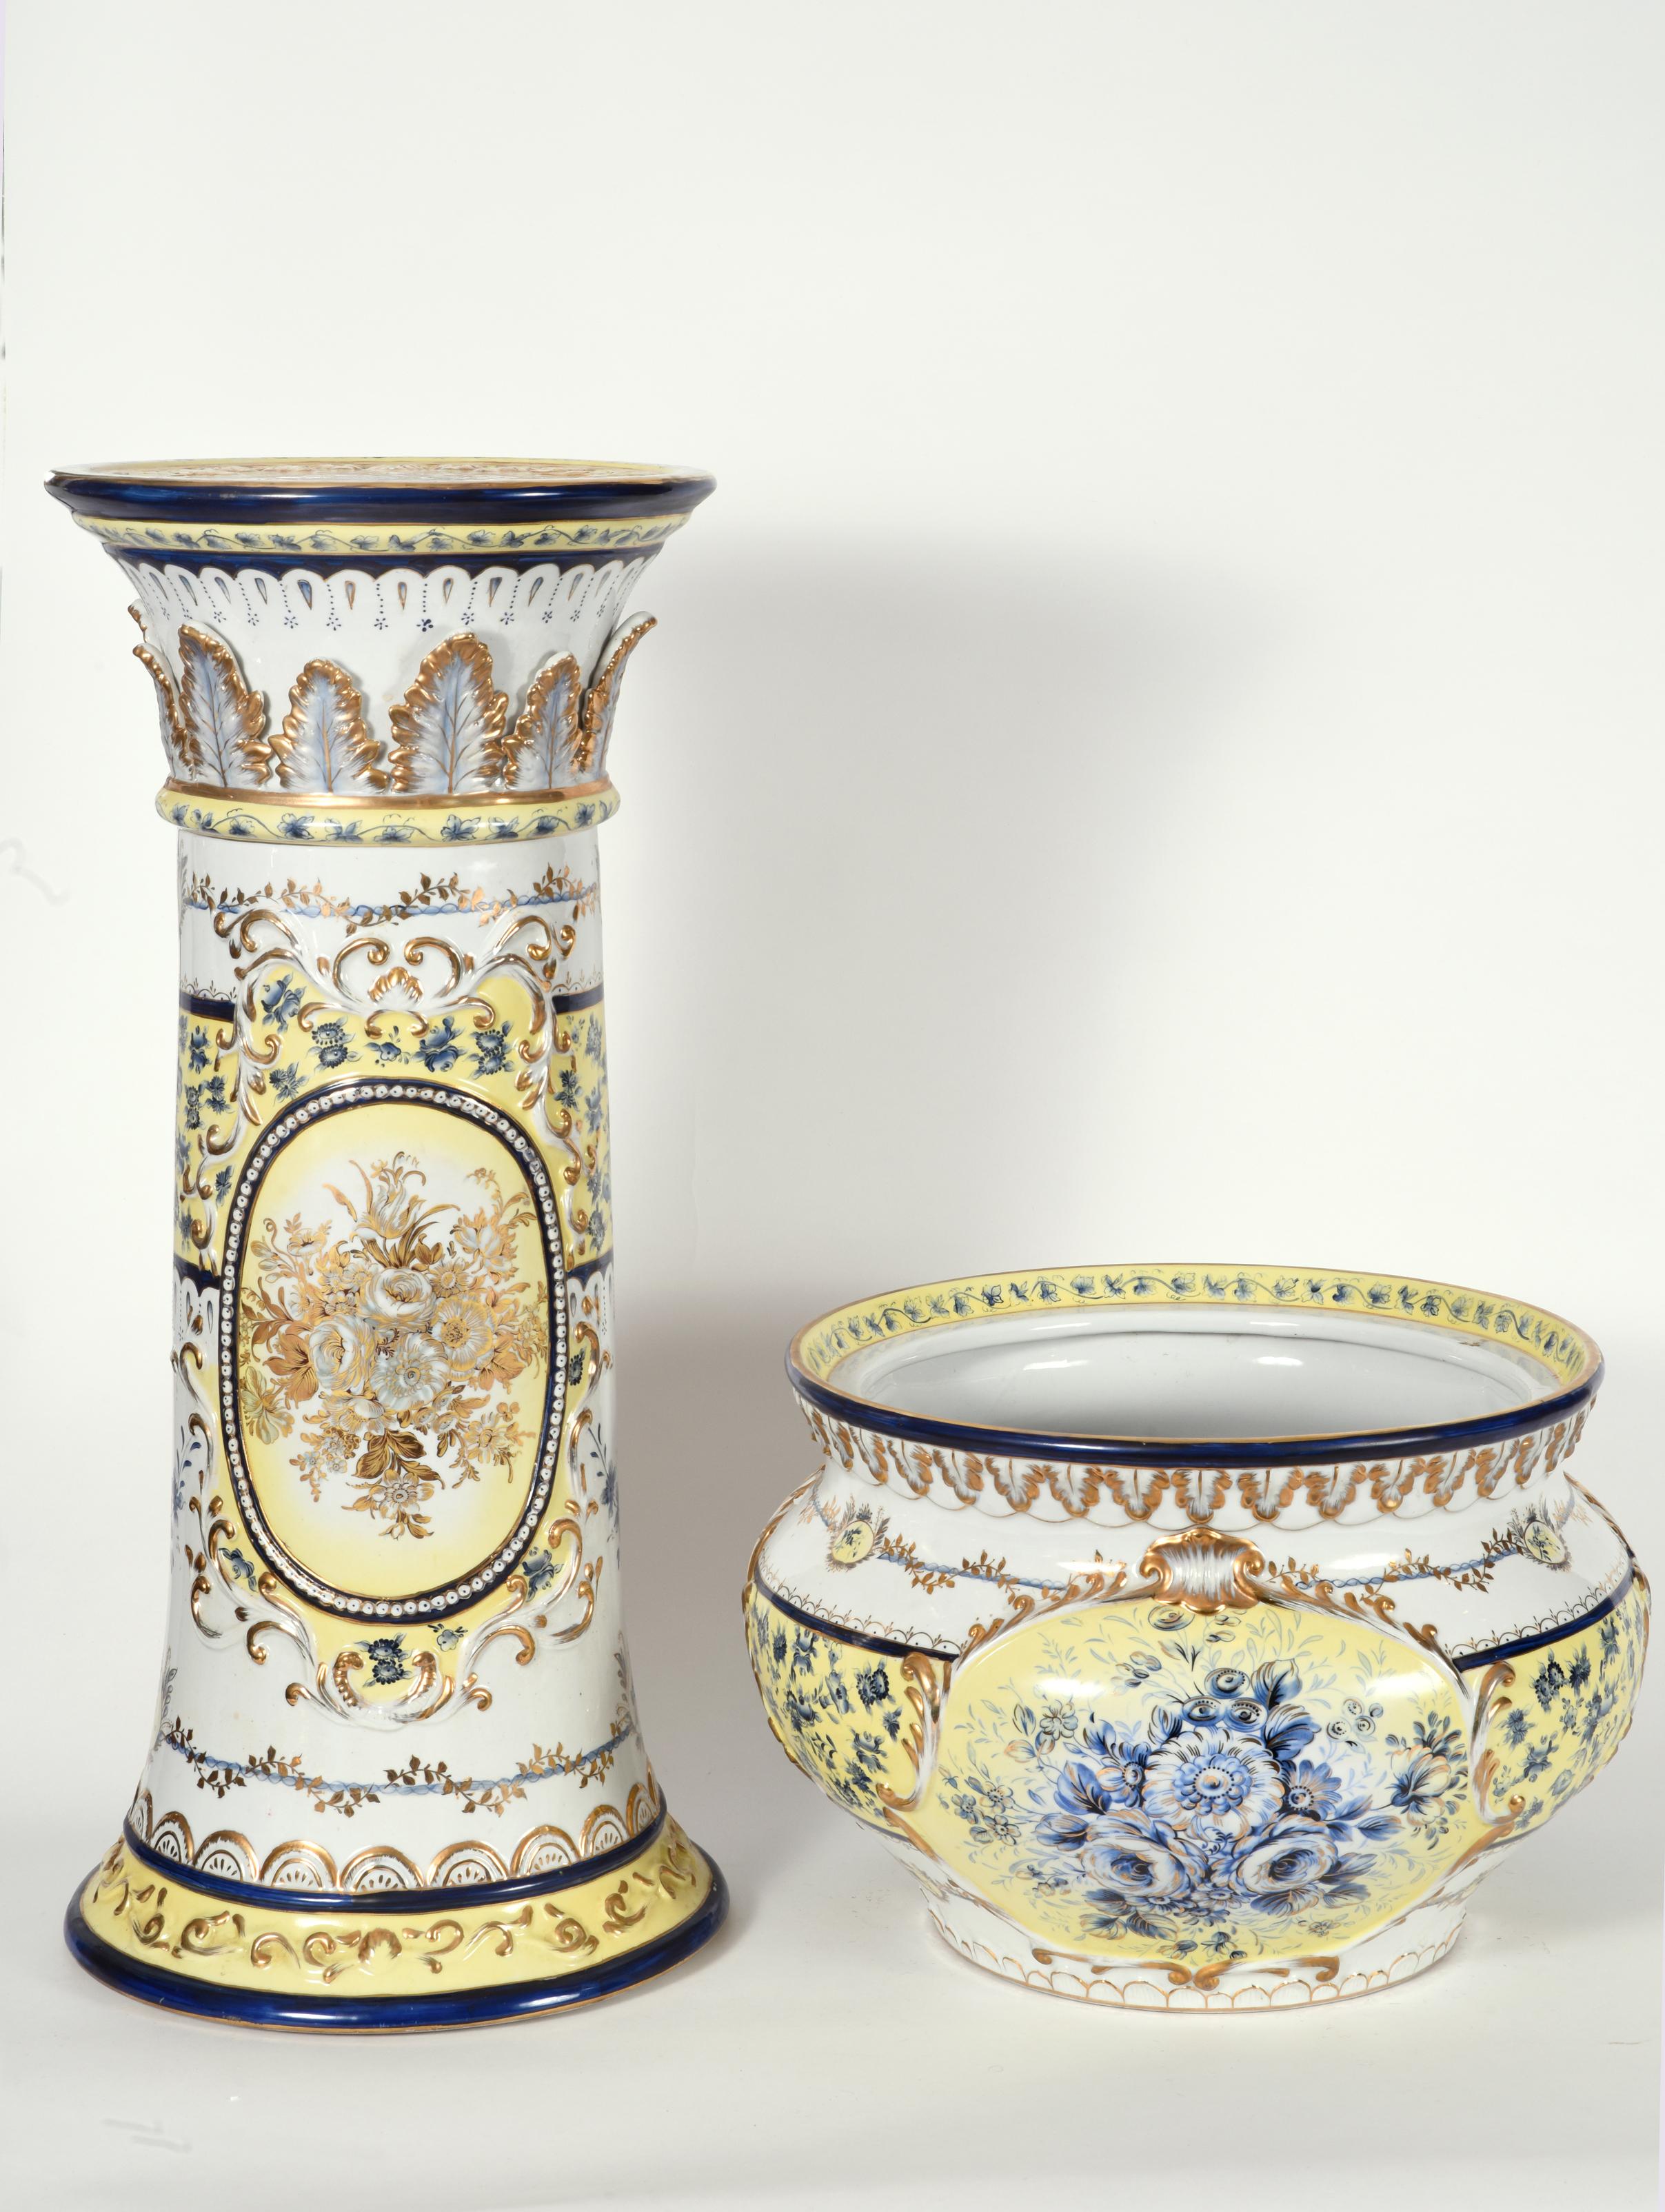 French neoclassical style porcelain plant stand with cachepot decorative set. The pieces are featured a gilt floral and acanthus leaf design details. The pieces are in excellent vintage condition. Together the stand with cachepot measure 36.5 inches